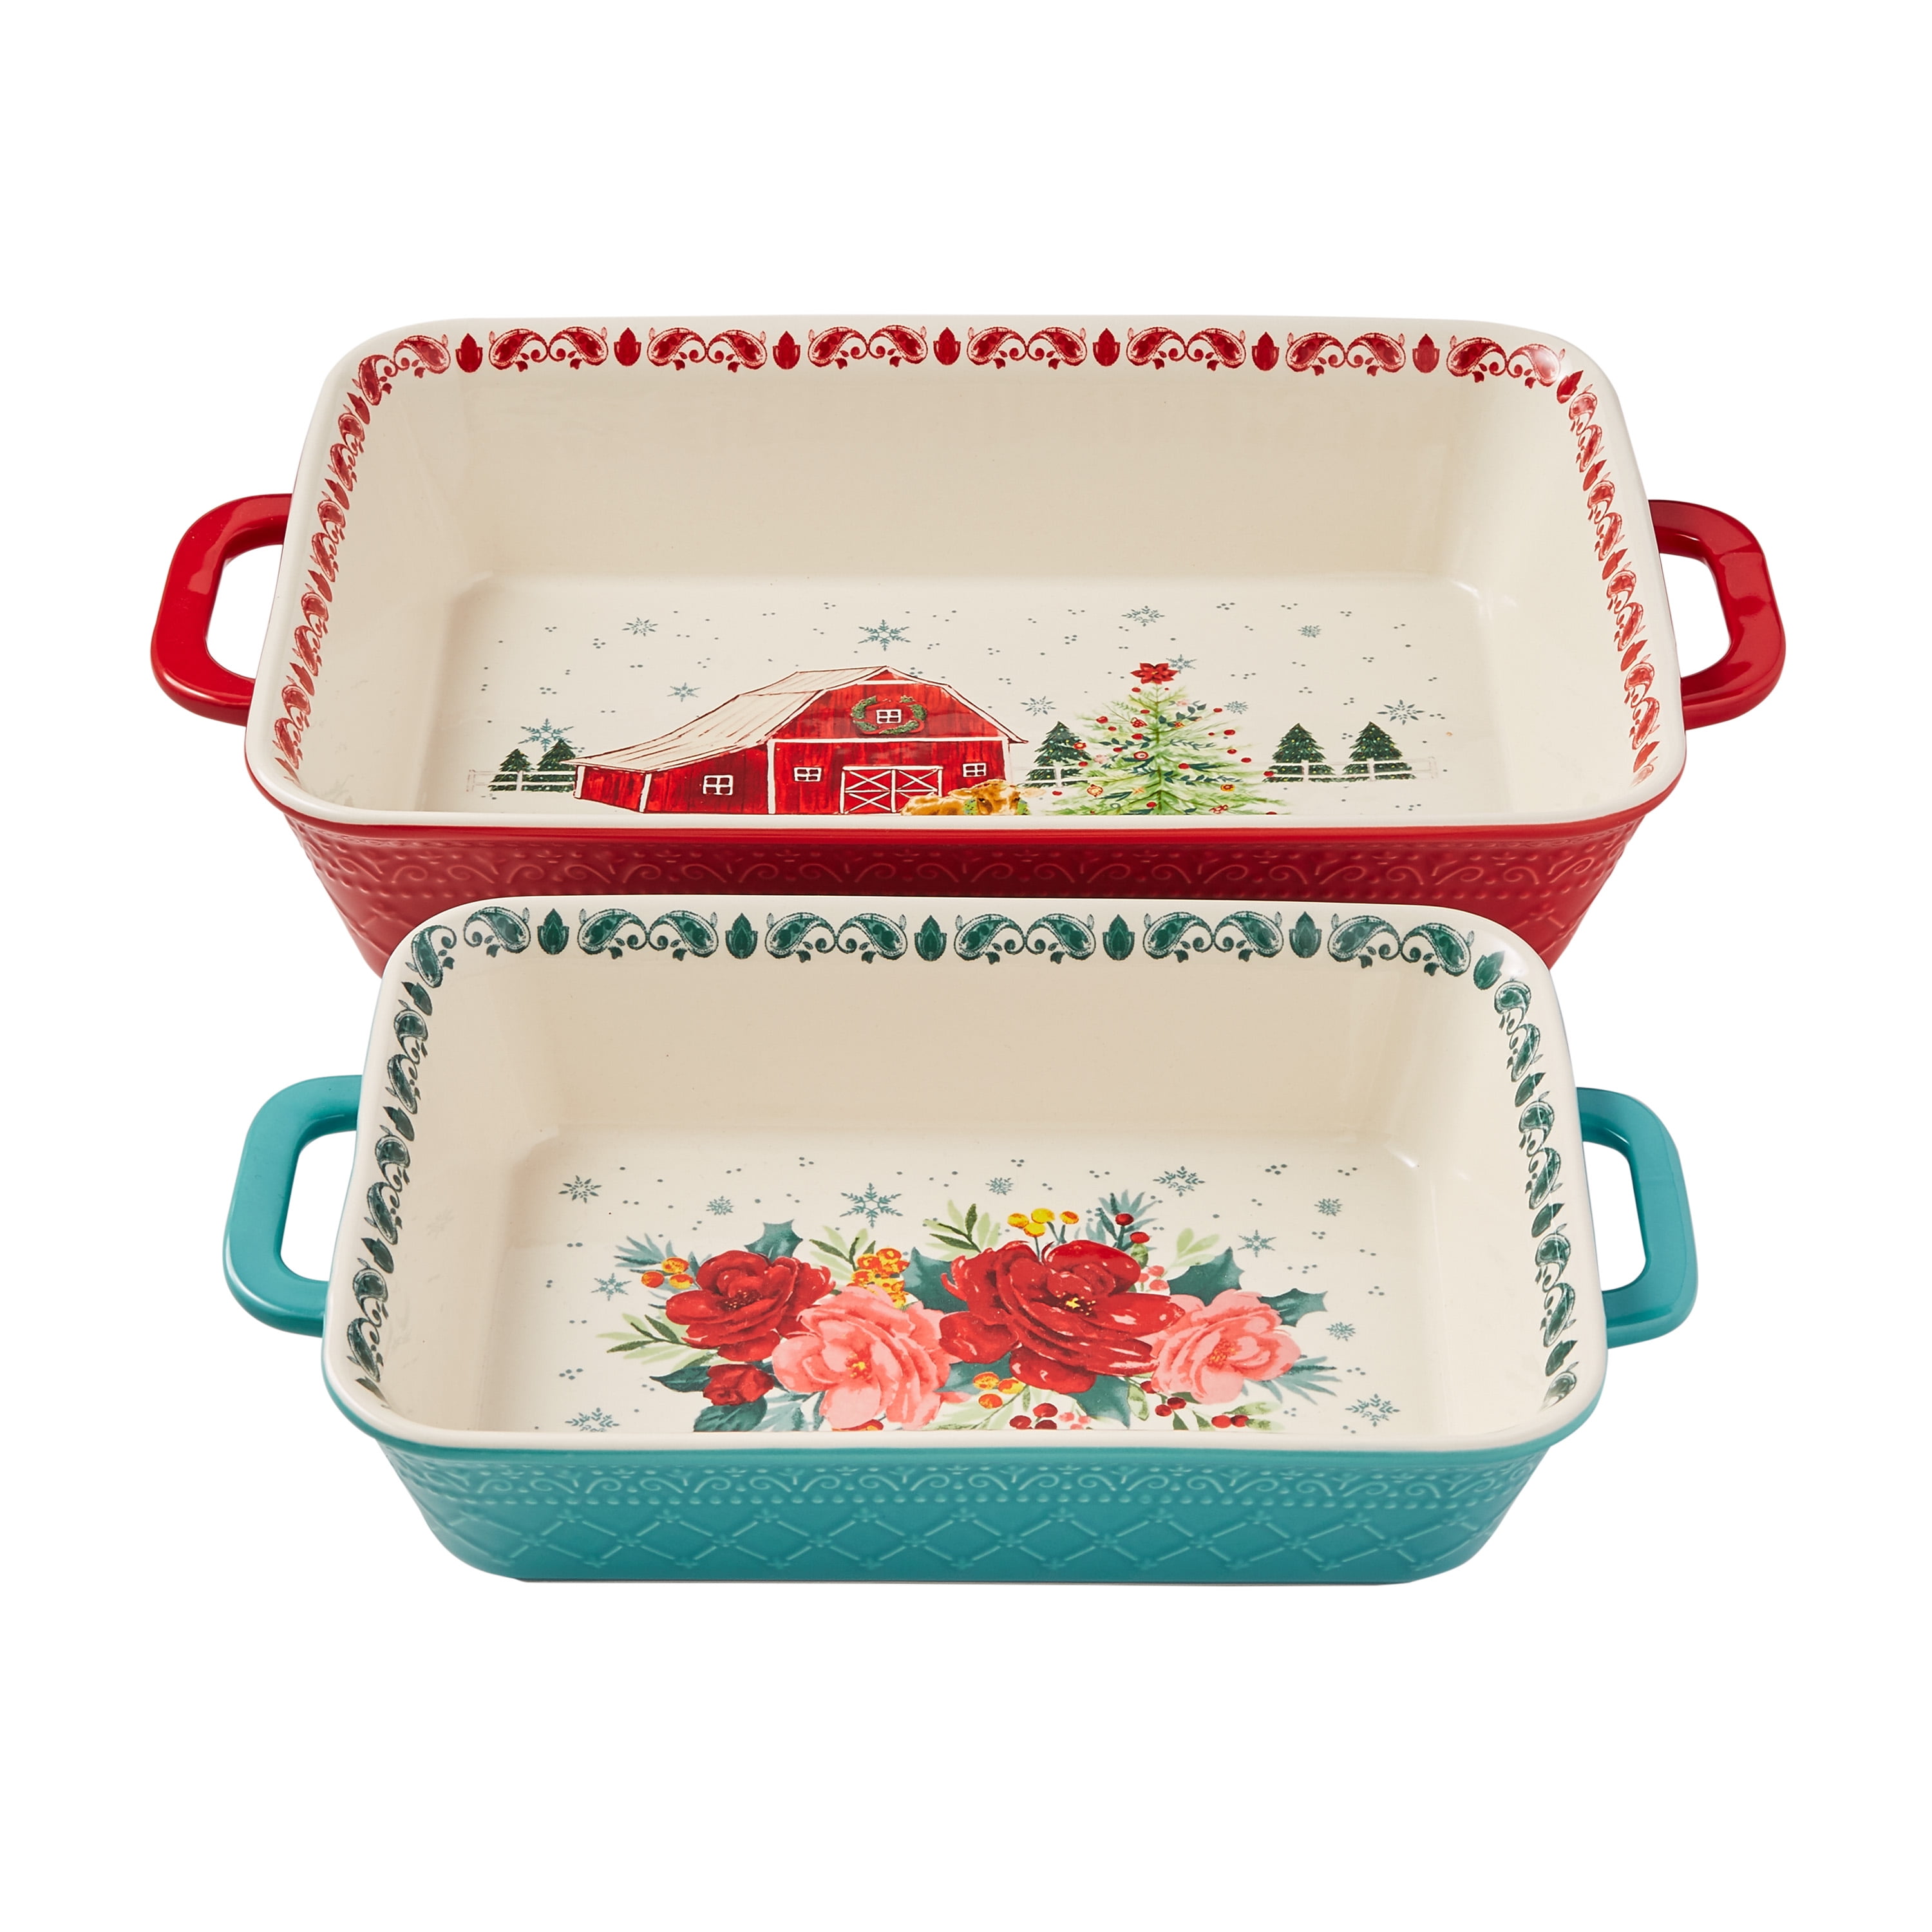 The Pioneer Woman Collected 16-Piece Baking Set